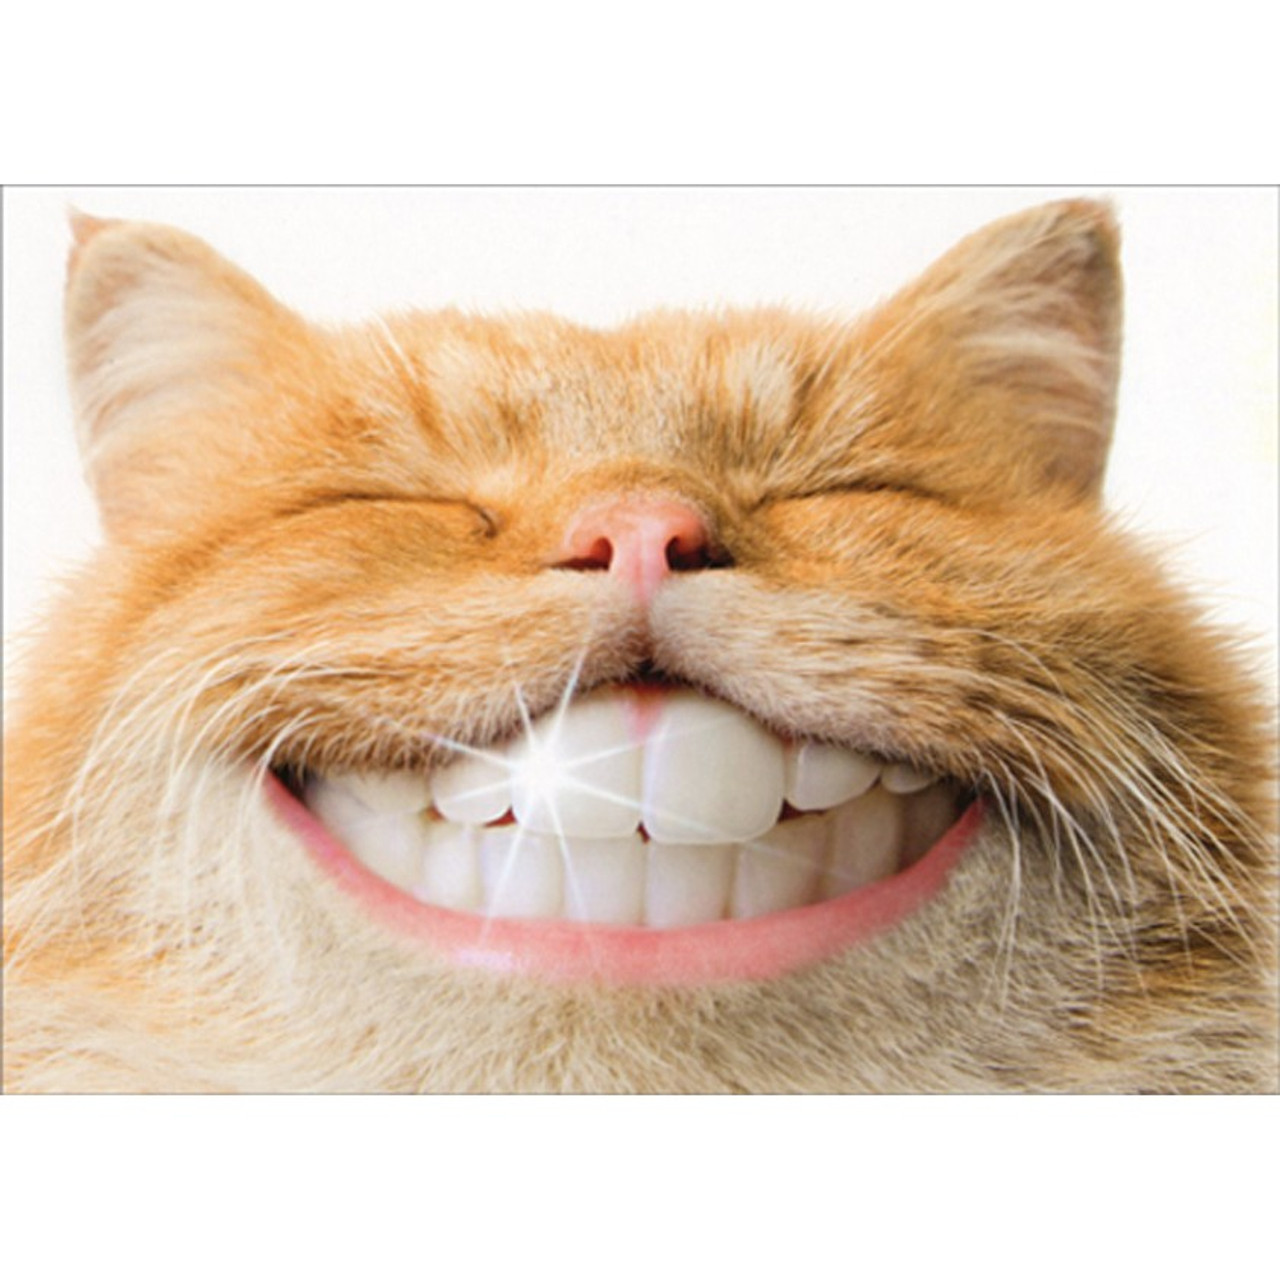 animals smiling with human teeth